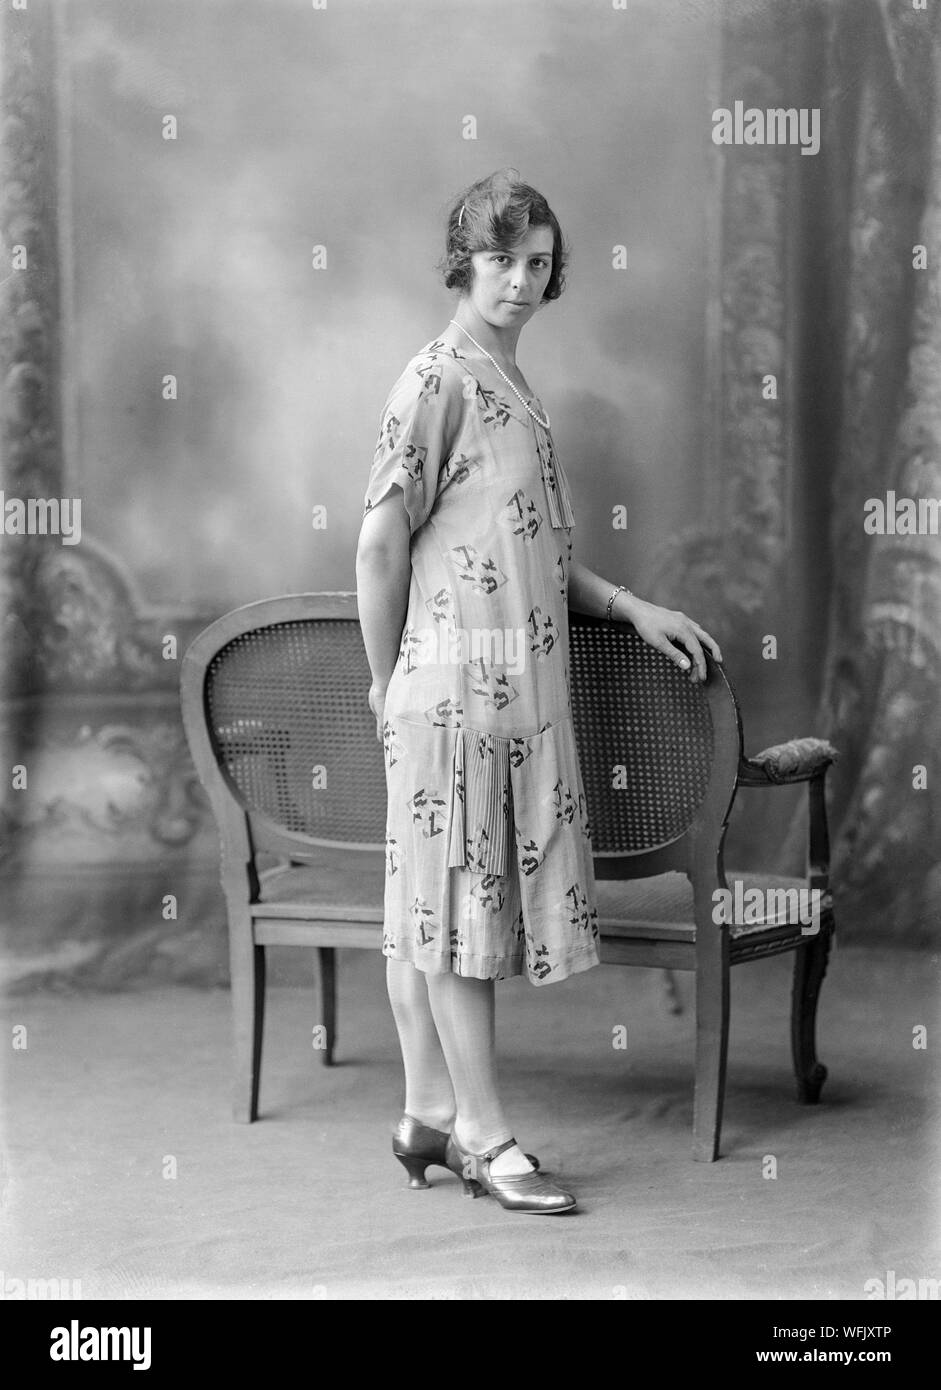 Early twentieth century black and white vintage photograph, taken in a photographic studio, showing a young woman, in a dress typical of the fashion of the period, posing for the camera whilst standing. Stock Photo